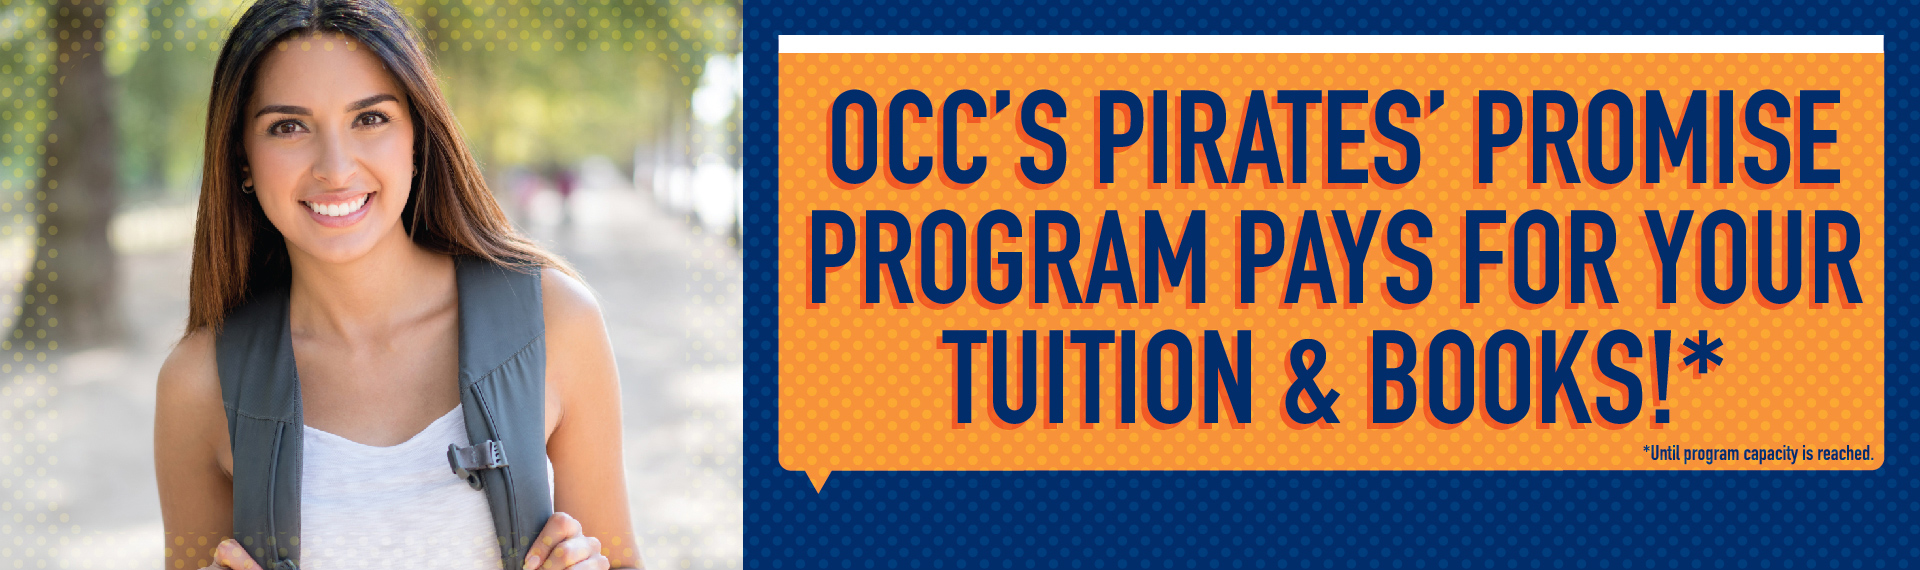 Pirates' Promise pays for your tuition and books